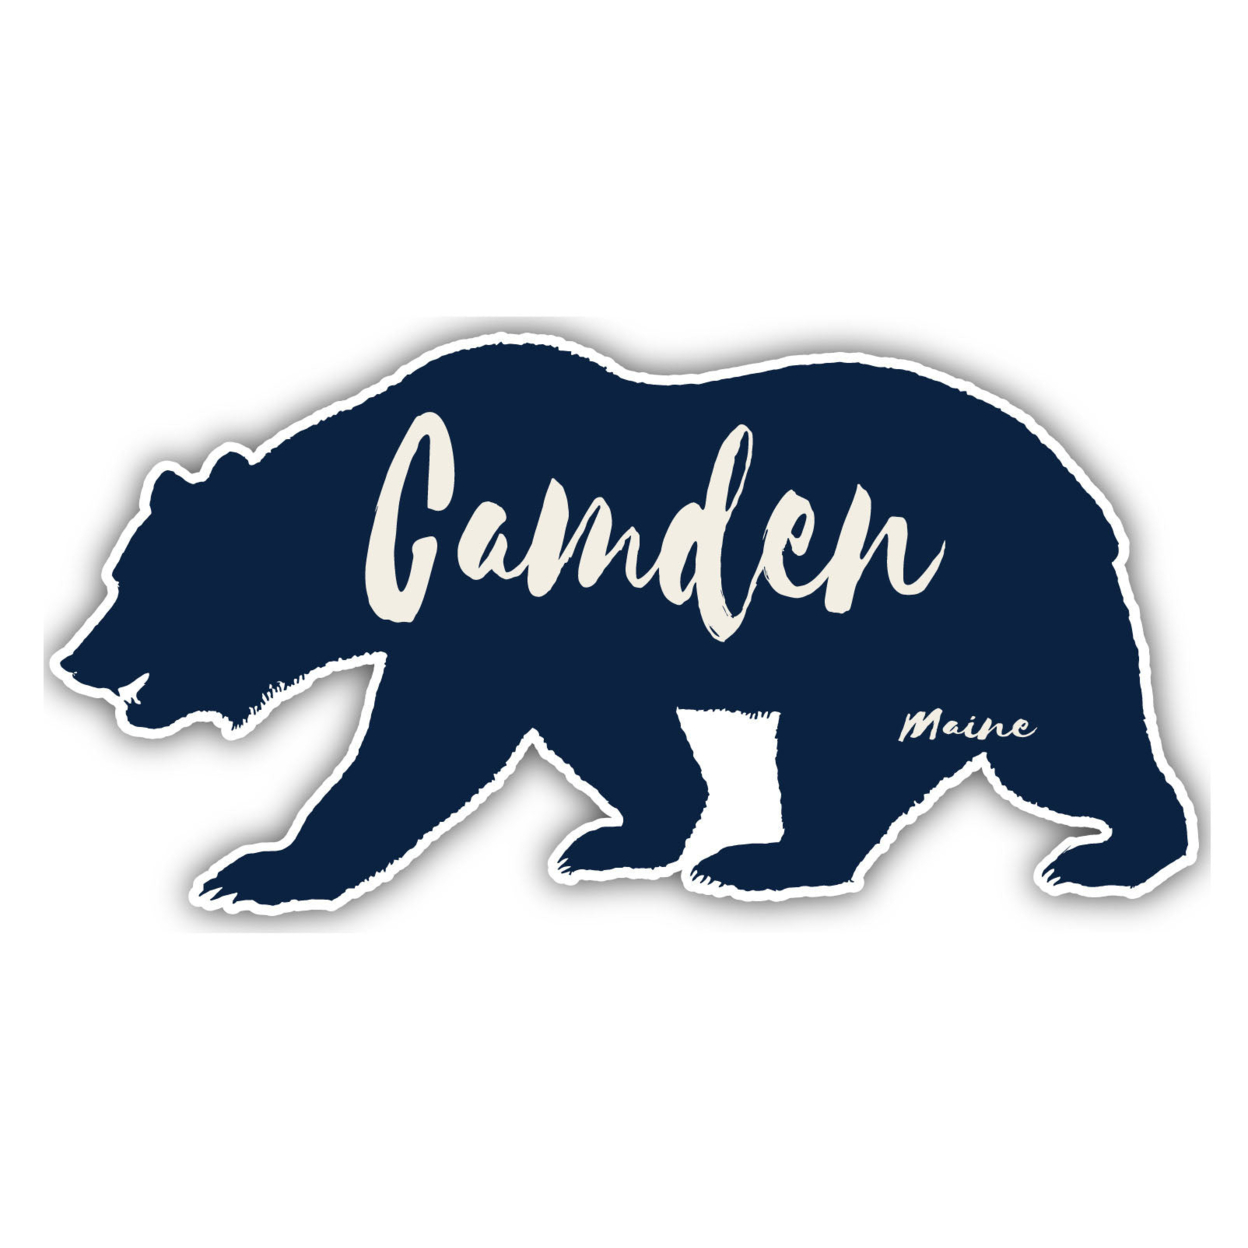 Camden Maine Souvenir Decorative Stickers (Choose Theme And Size) - 4-Pack, 8-Inch, Tent